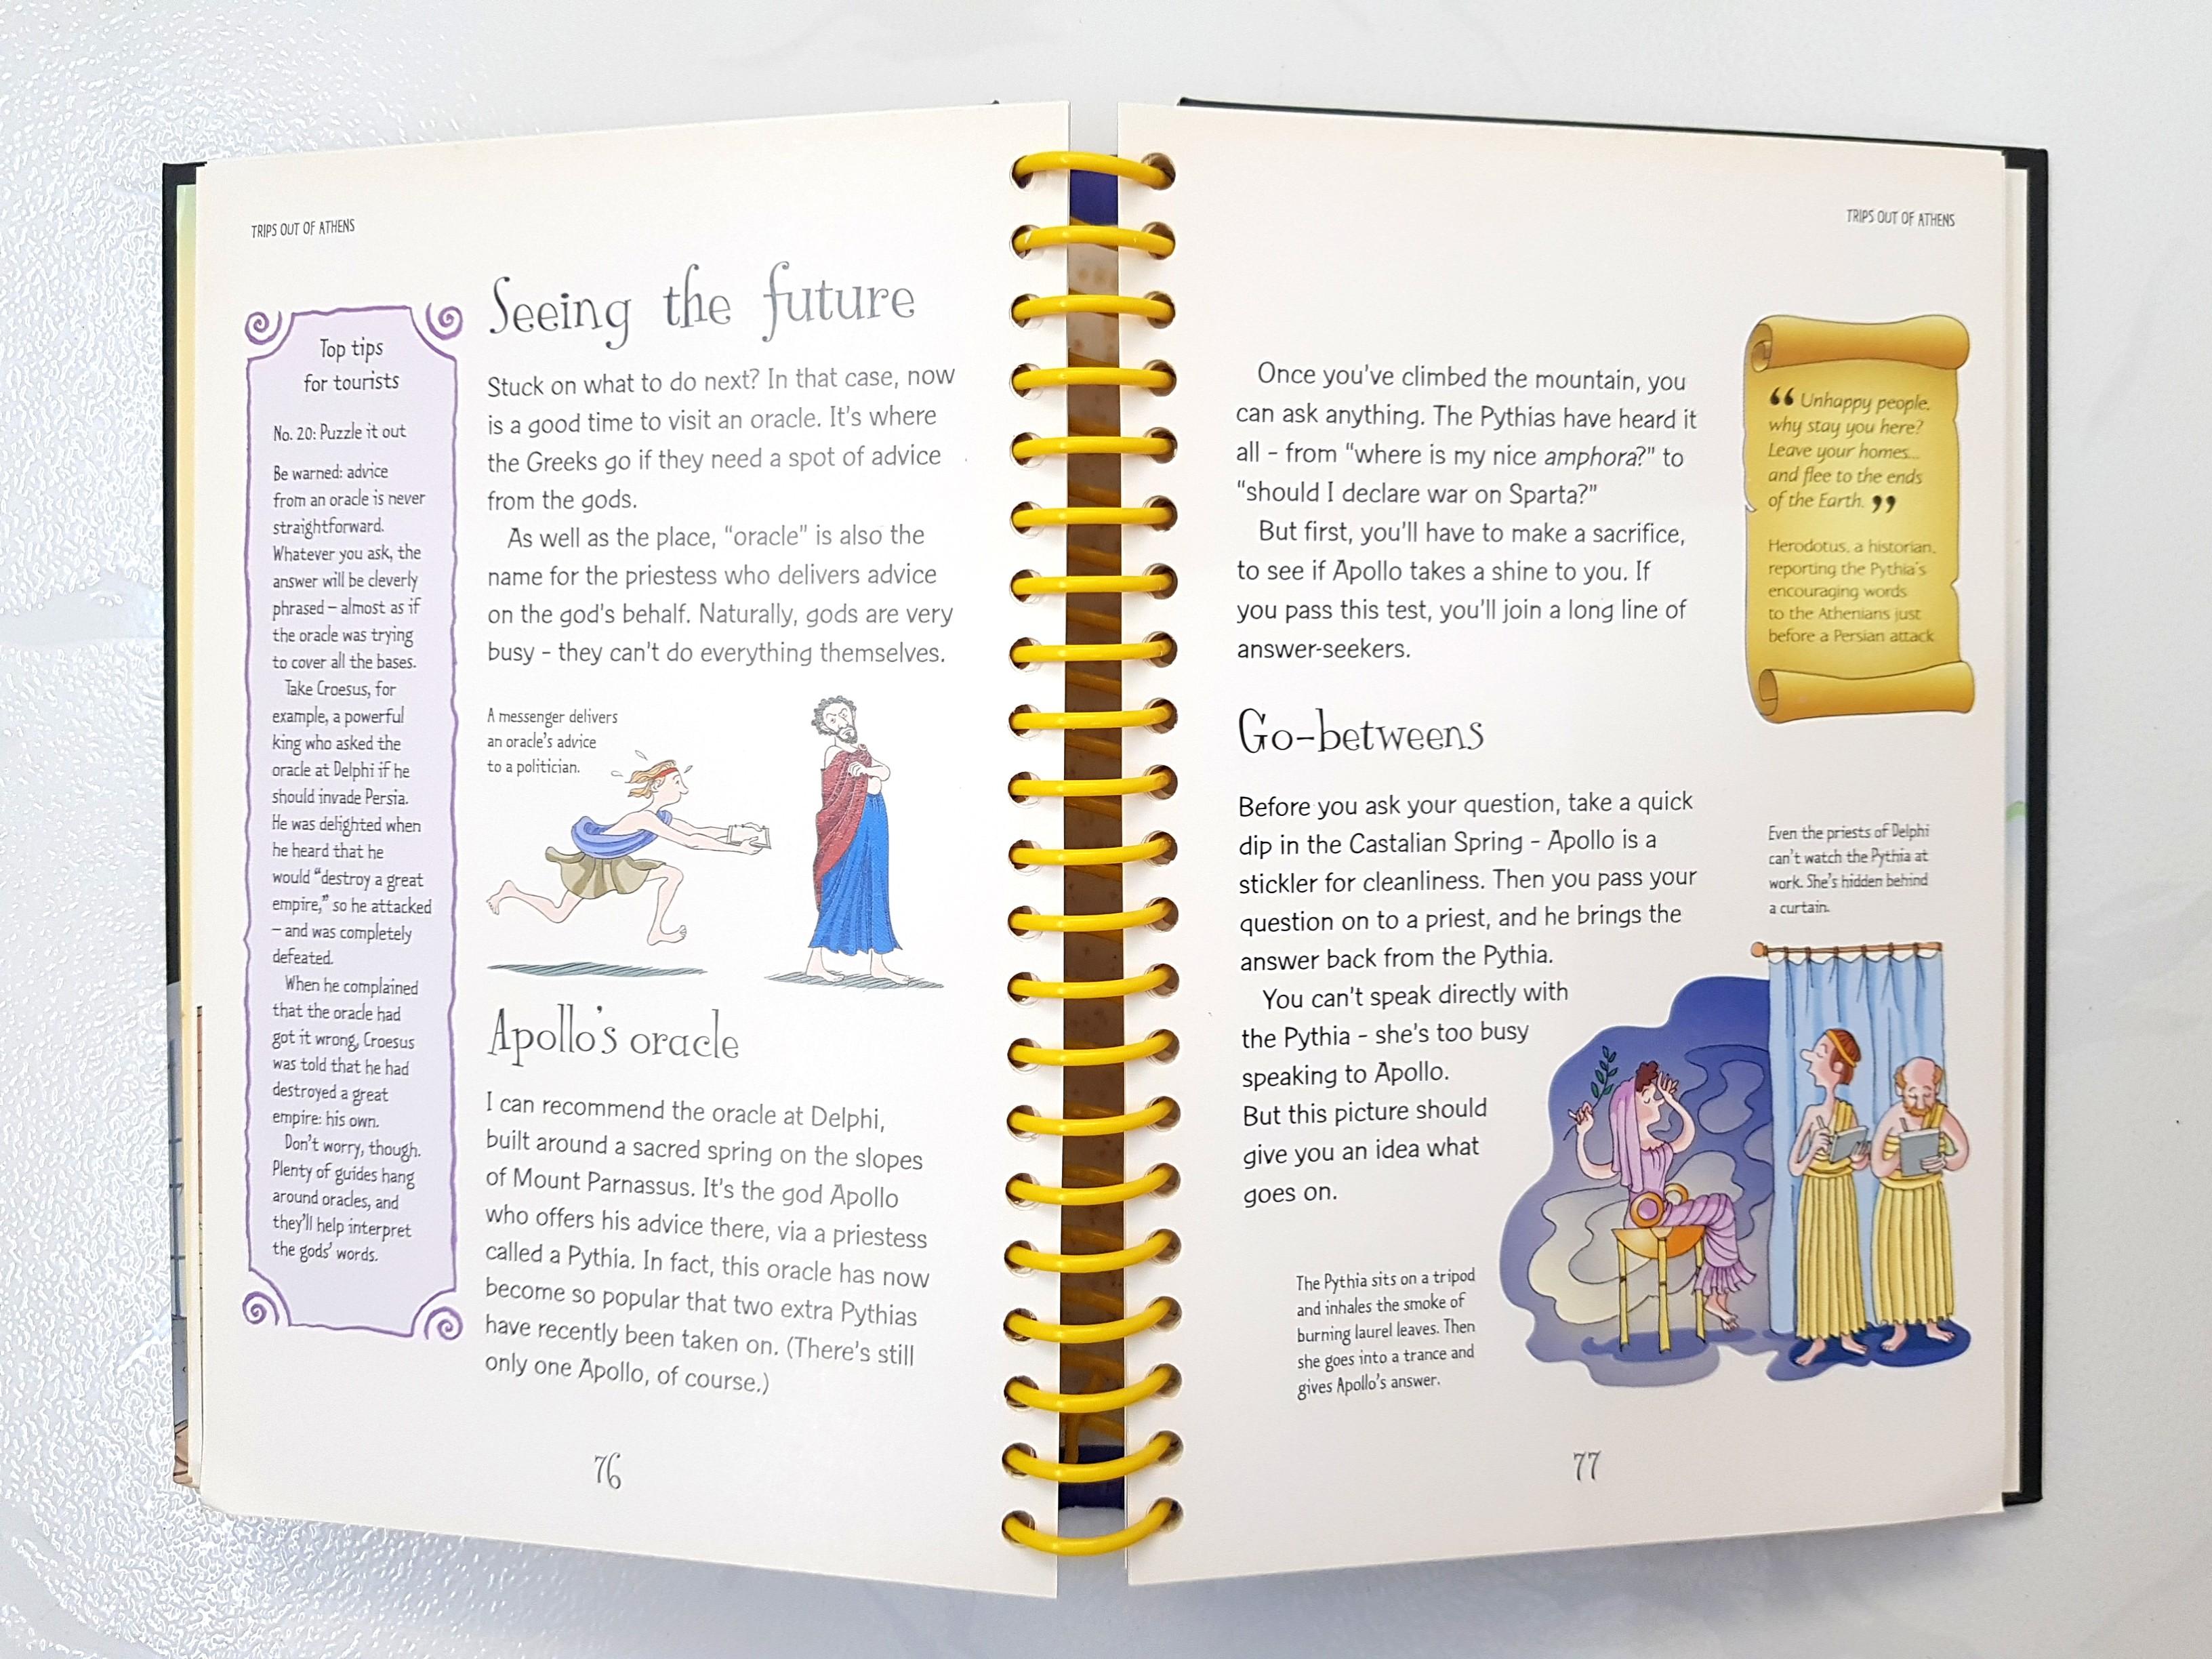 Visitor's　Books　by　129　on　to　Books　Lesley　Guide　Bound(Children　Non-Fiction),　Hobbies　Ancient　Ring　Children's　Hardcover　Greece　A　pages,　Magazines,　Toys,　Carousell　Usborne　Sims,